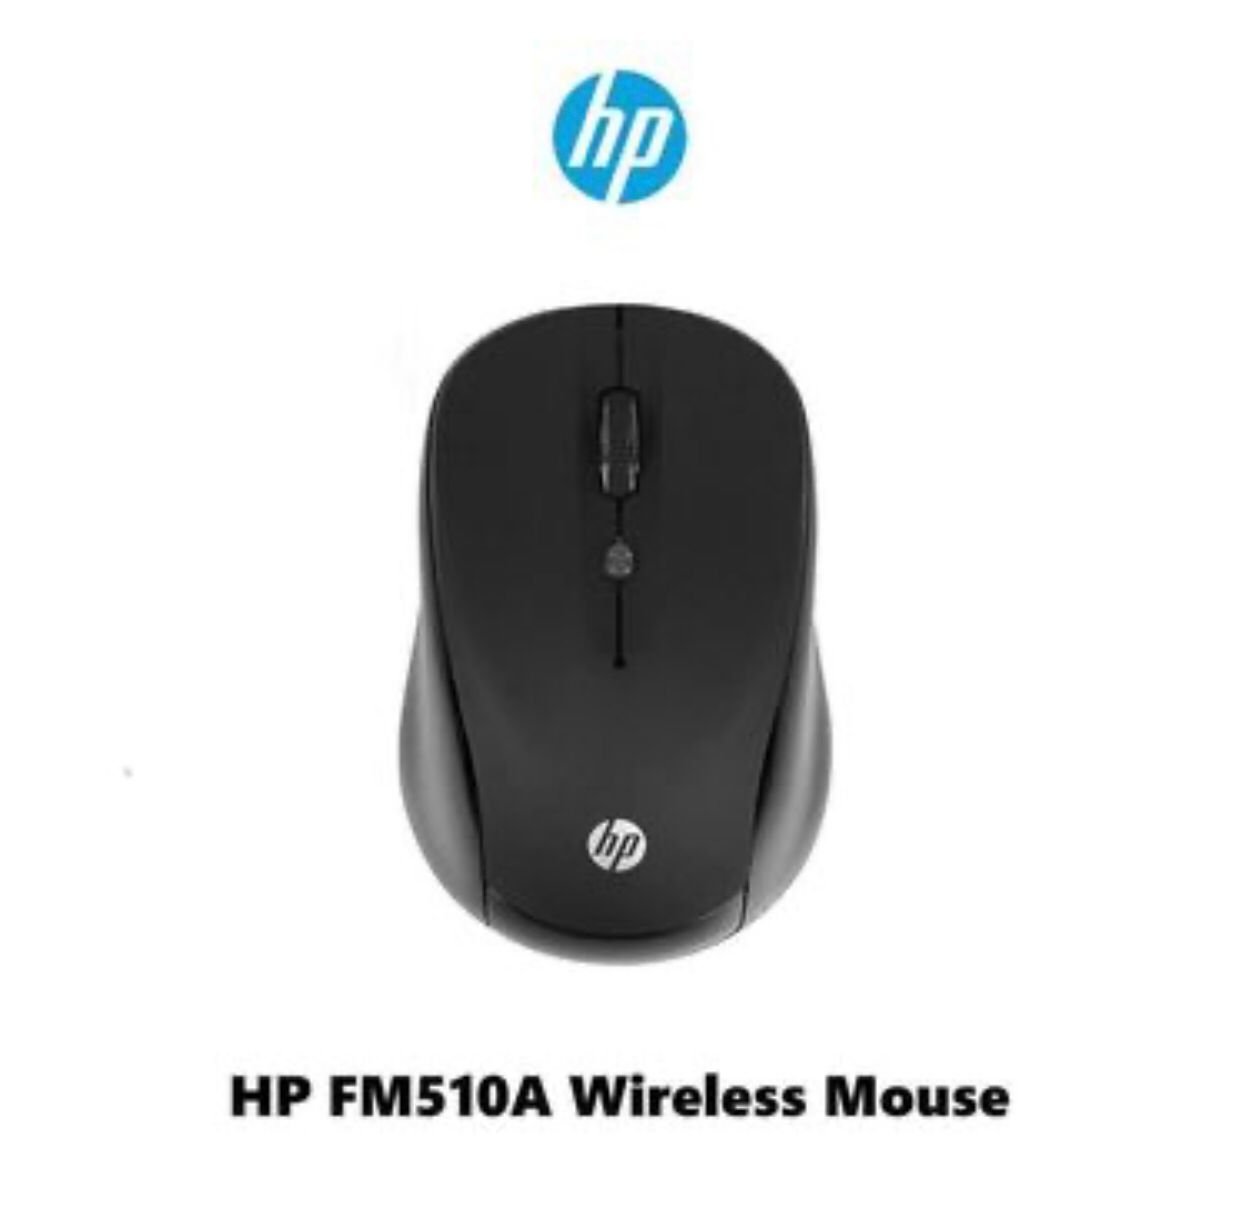 HP FM510A WIRELESS MOUSE